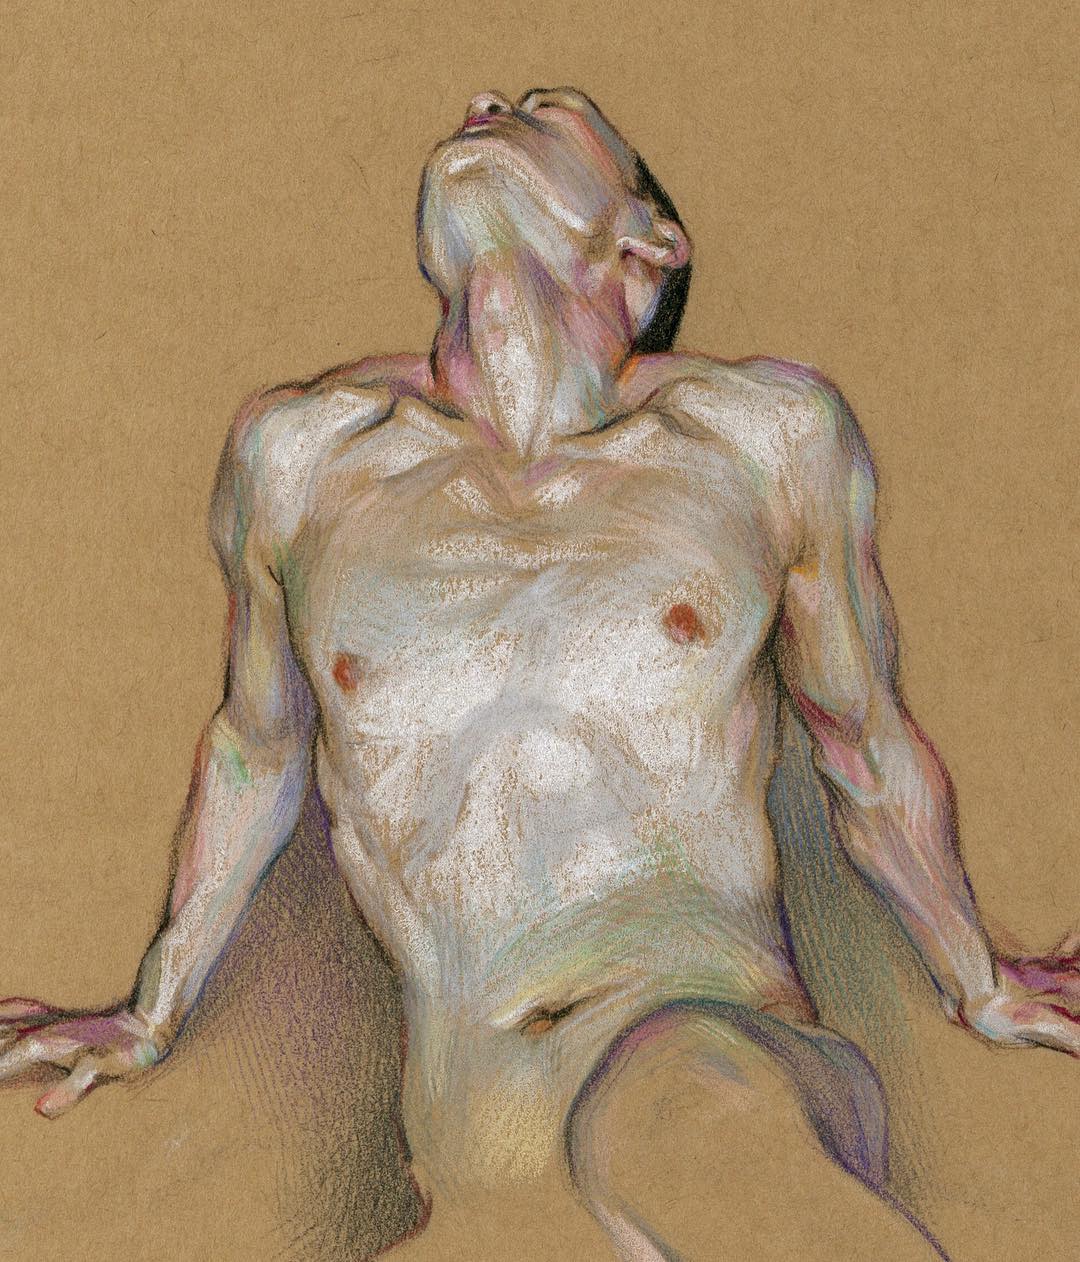 Expressive Anatomical Colored Pencil Drawings By Wanjin Gim 16